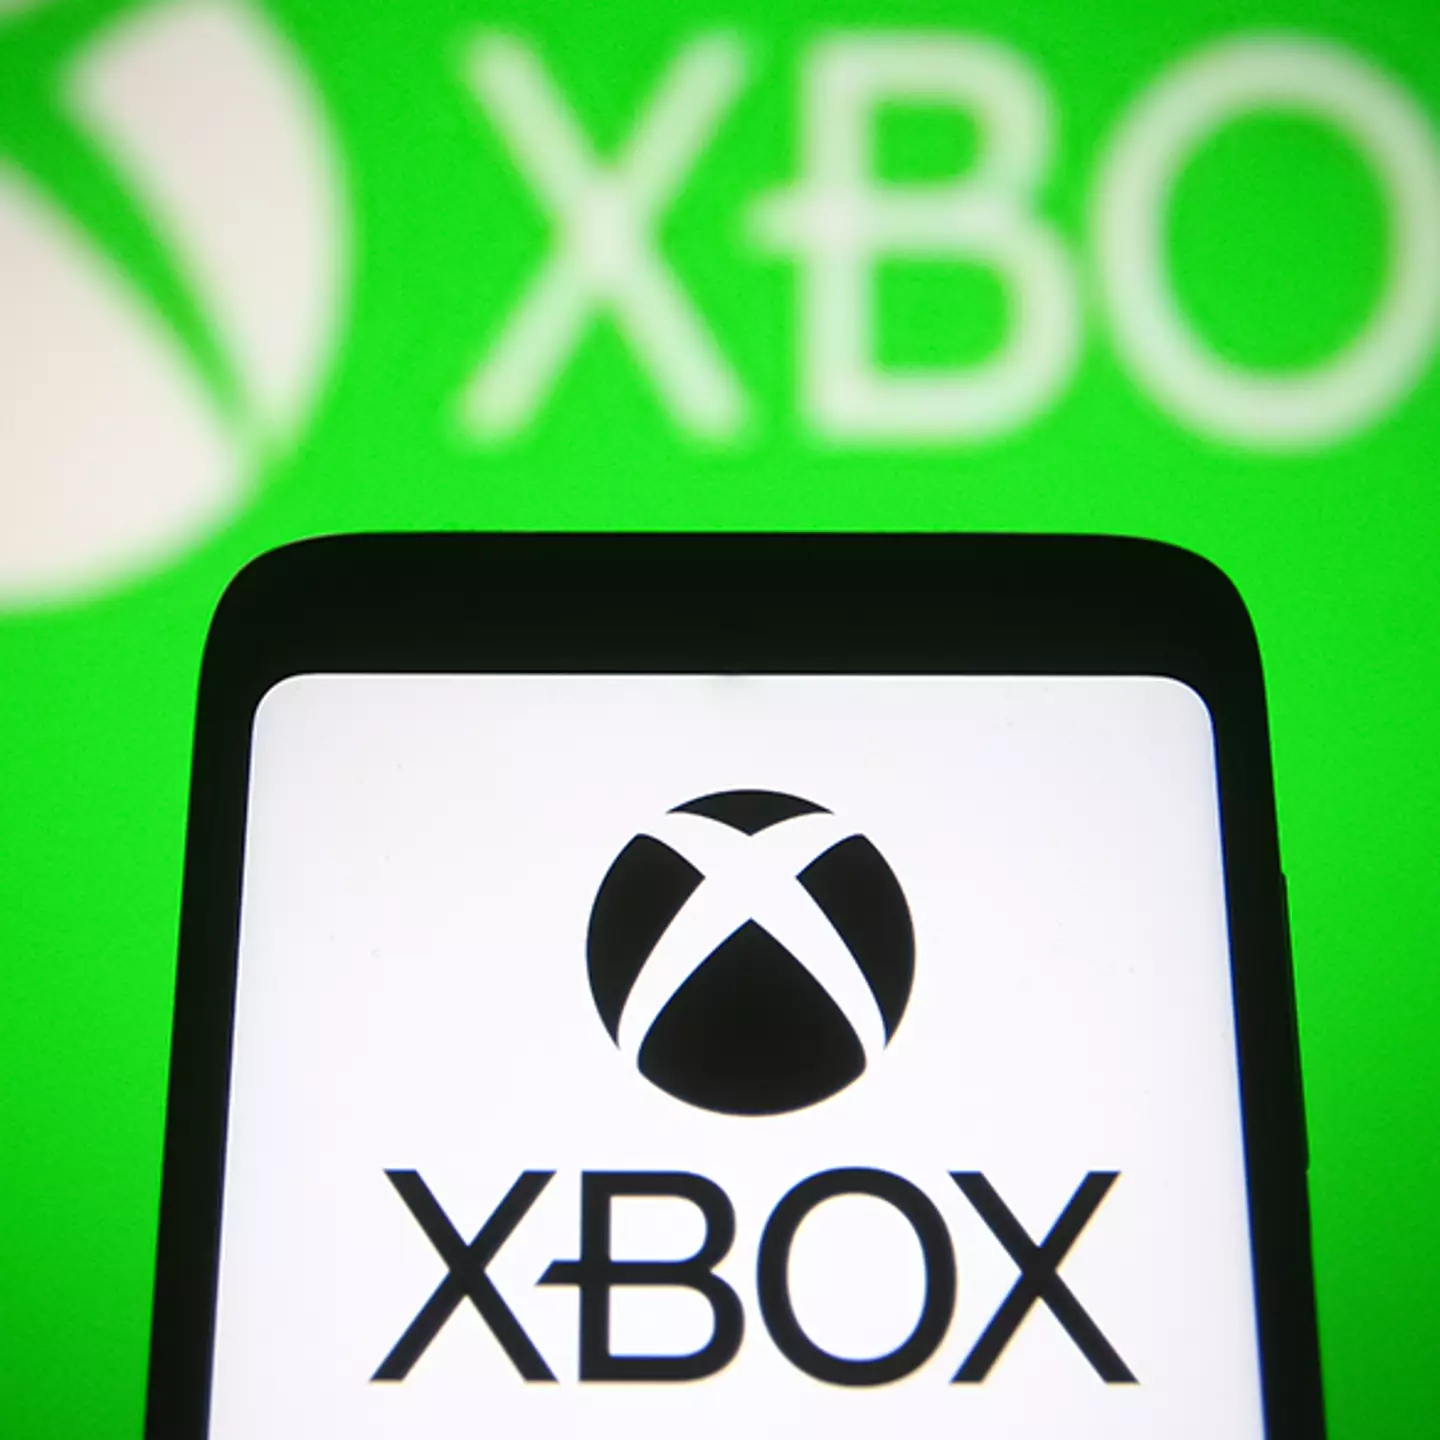 Microsoft announces four Xbox video games will be available on rival consoles